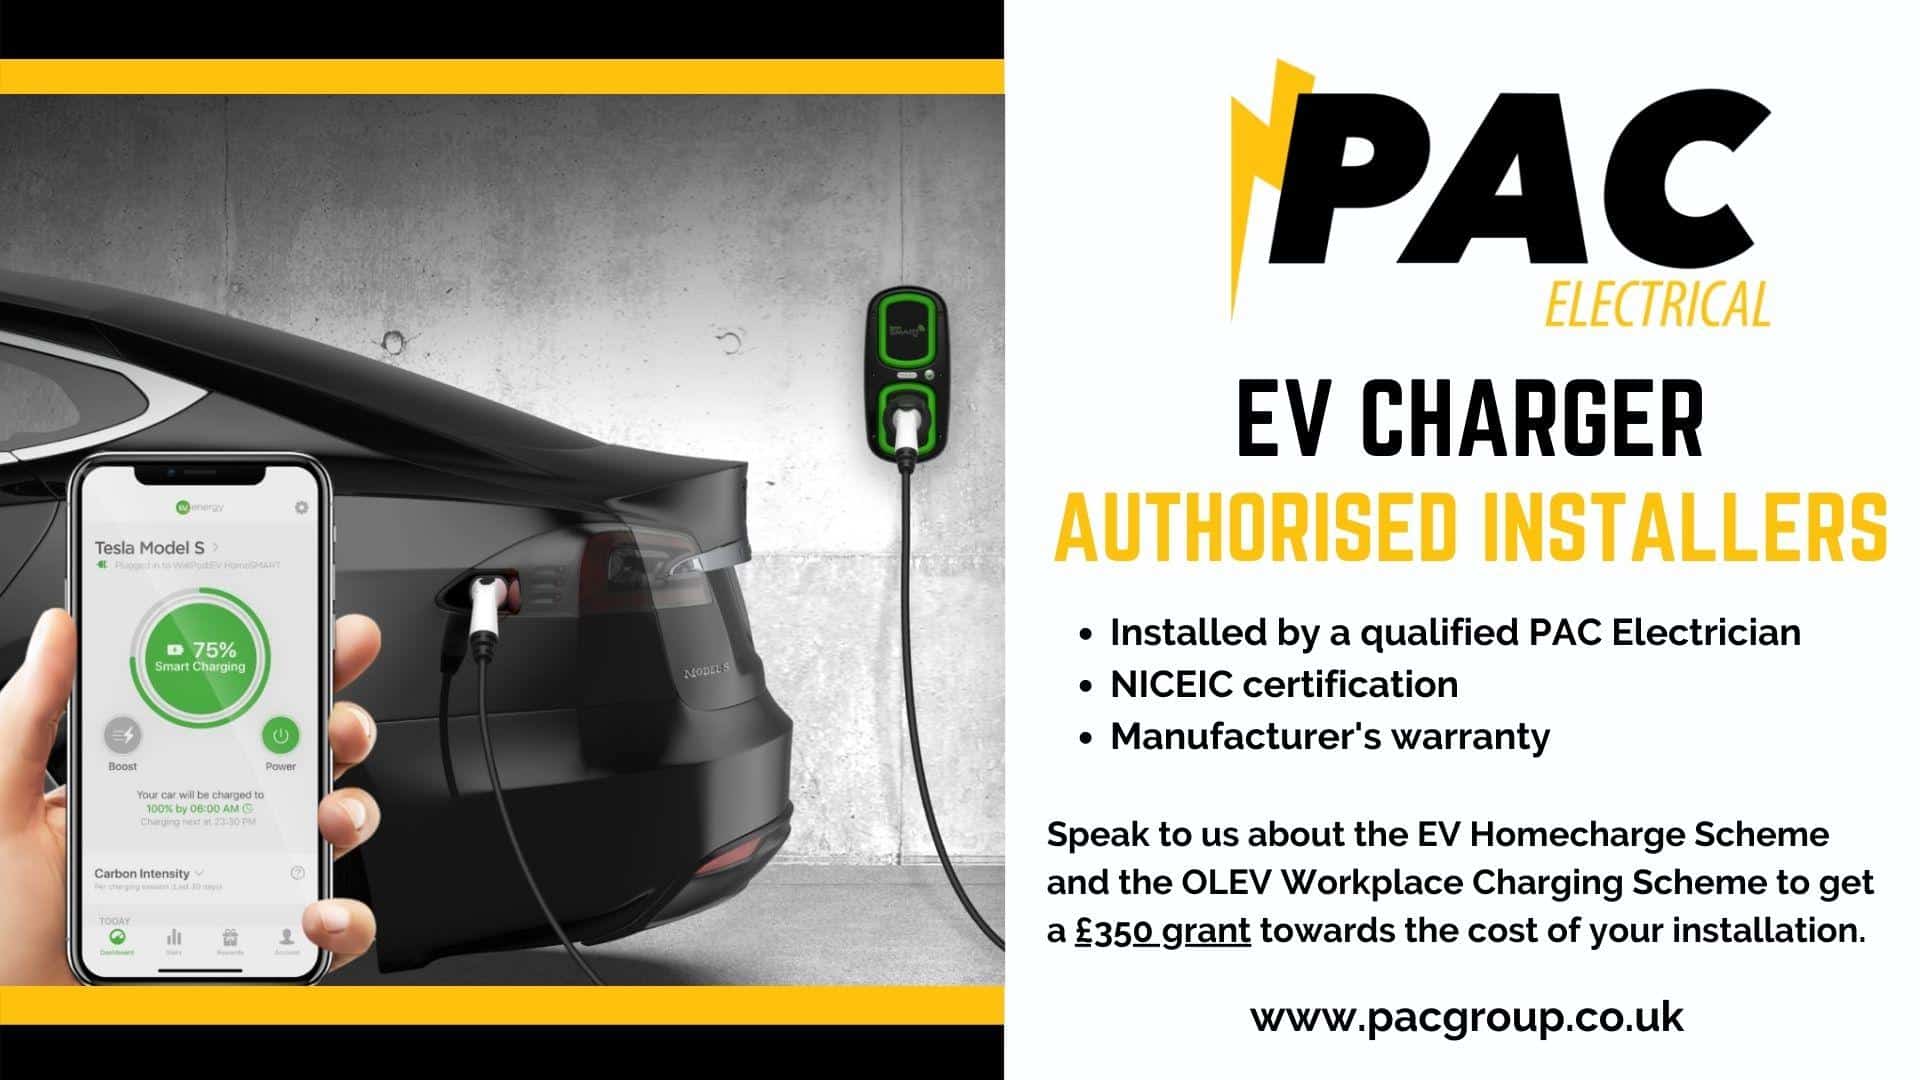 PAC Electrical EV Charger Installer Northern Ireland UK